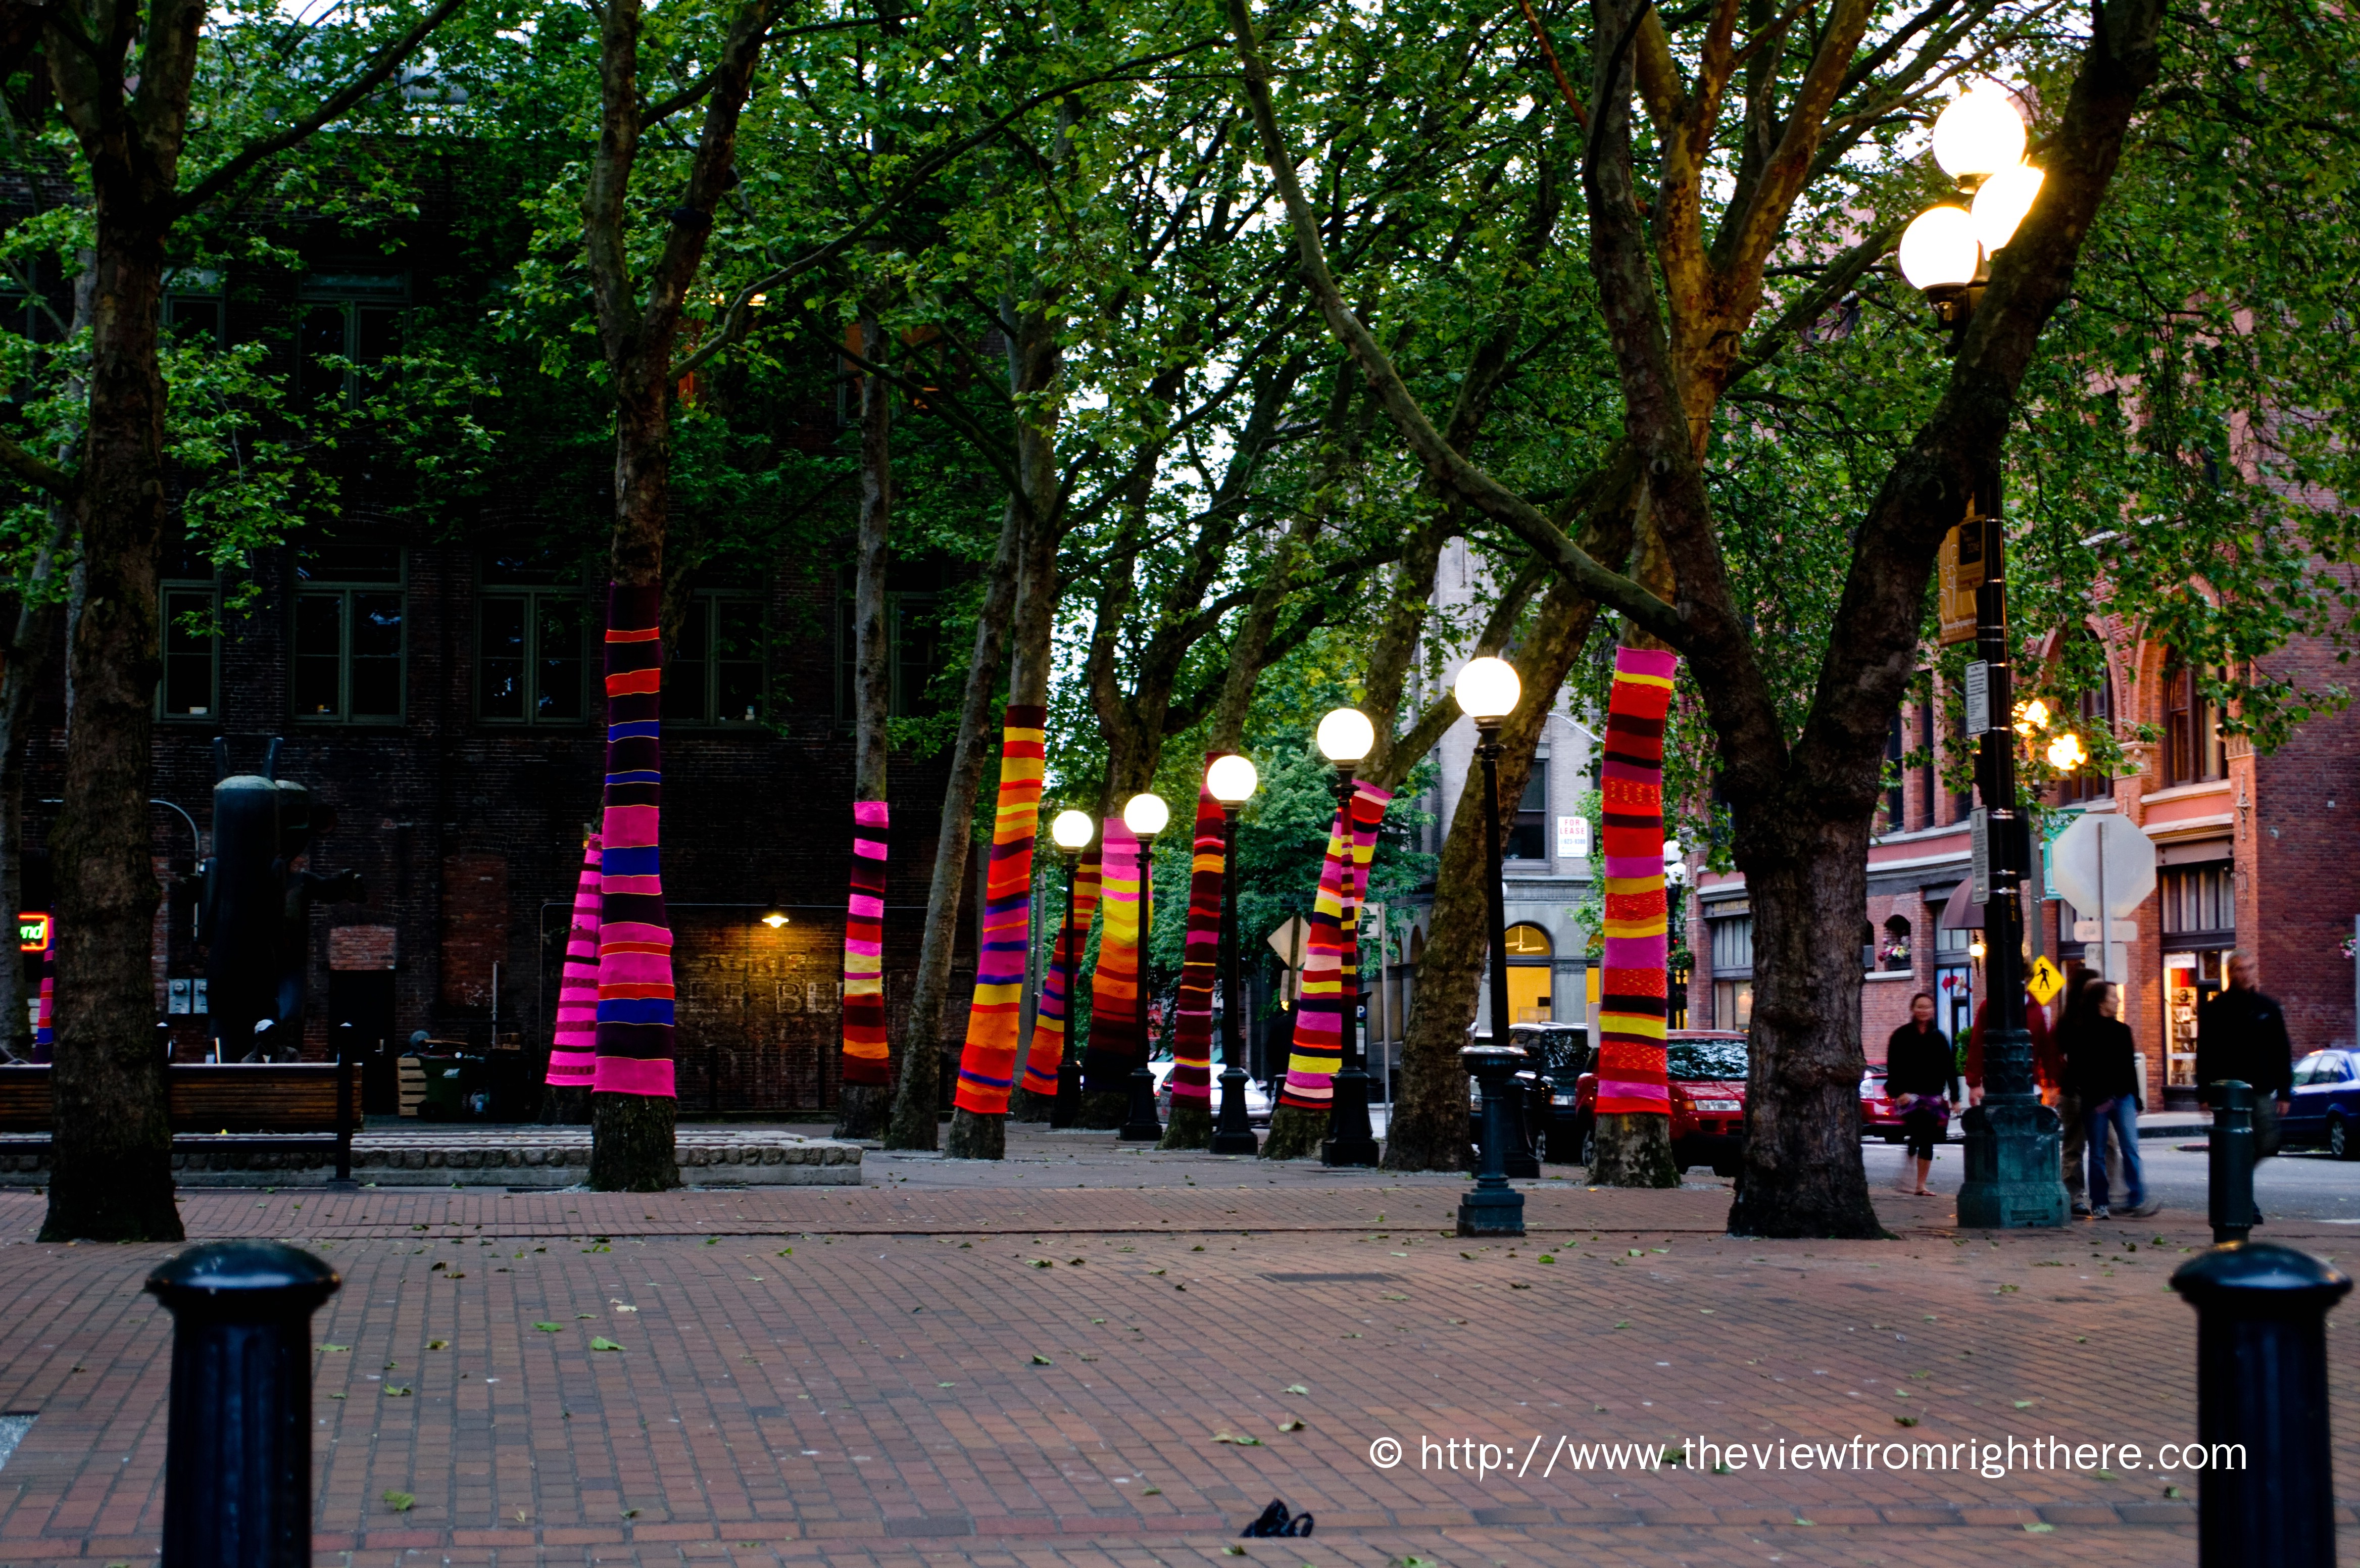 ARTSpark – Suzanne Tidwell’s Exhibit of Knitted Trees